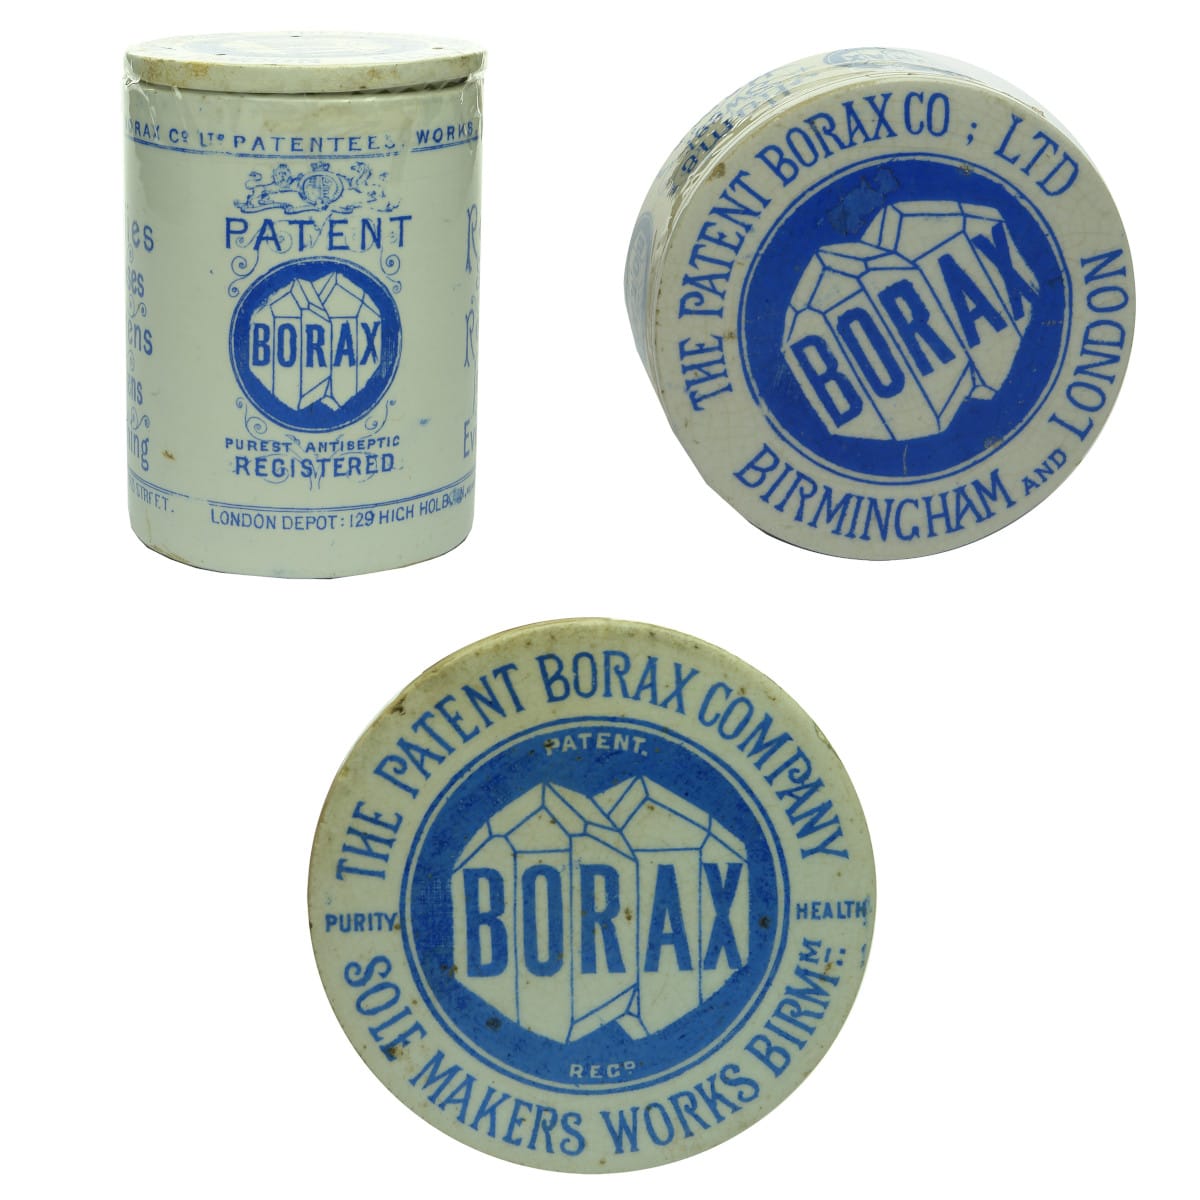 3 Borax items: Large and small Pot and Lid plus one extra lid on its own.